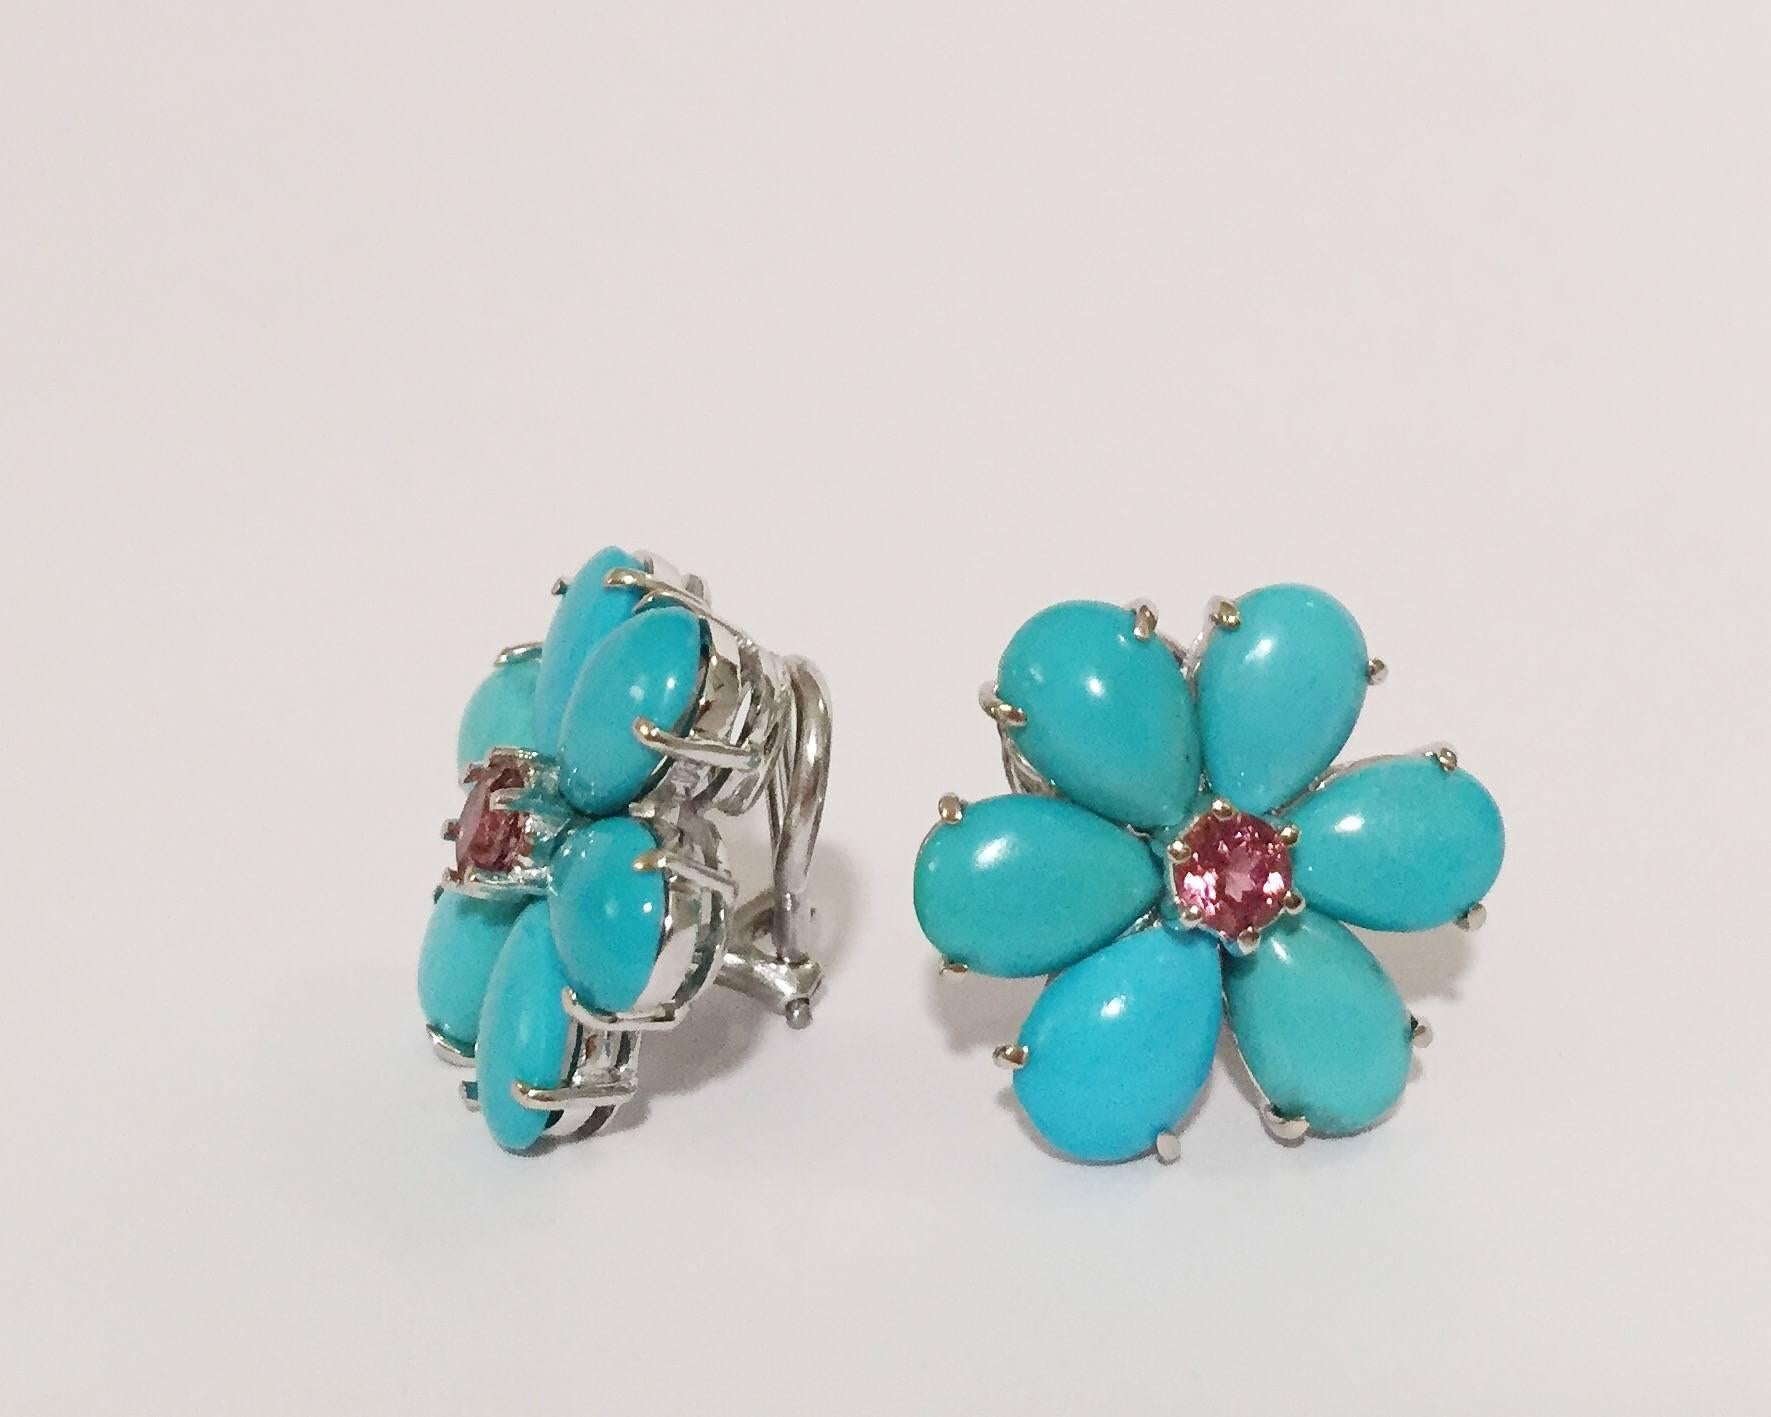 Contemporary Christina Addison Rubelite Turquoise Gold Flower Earrings For Sale